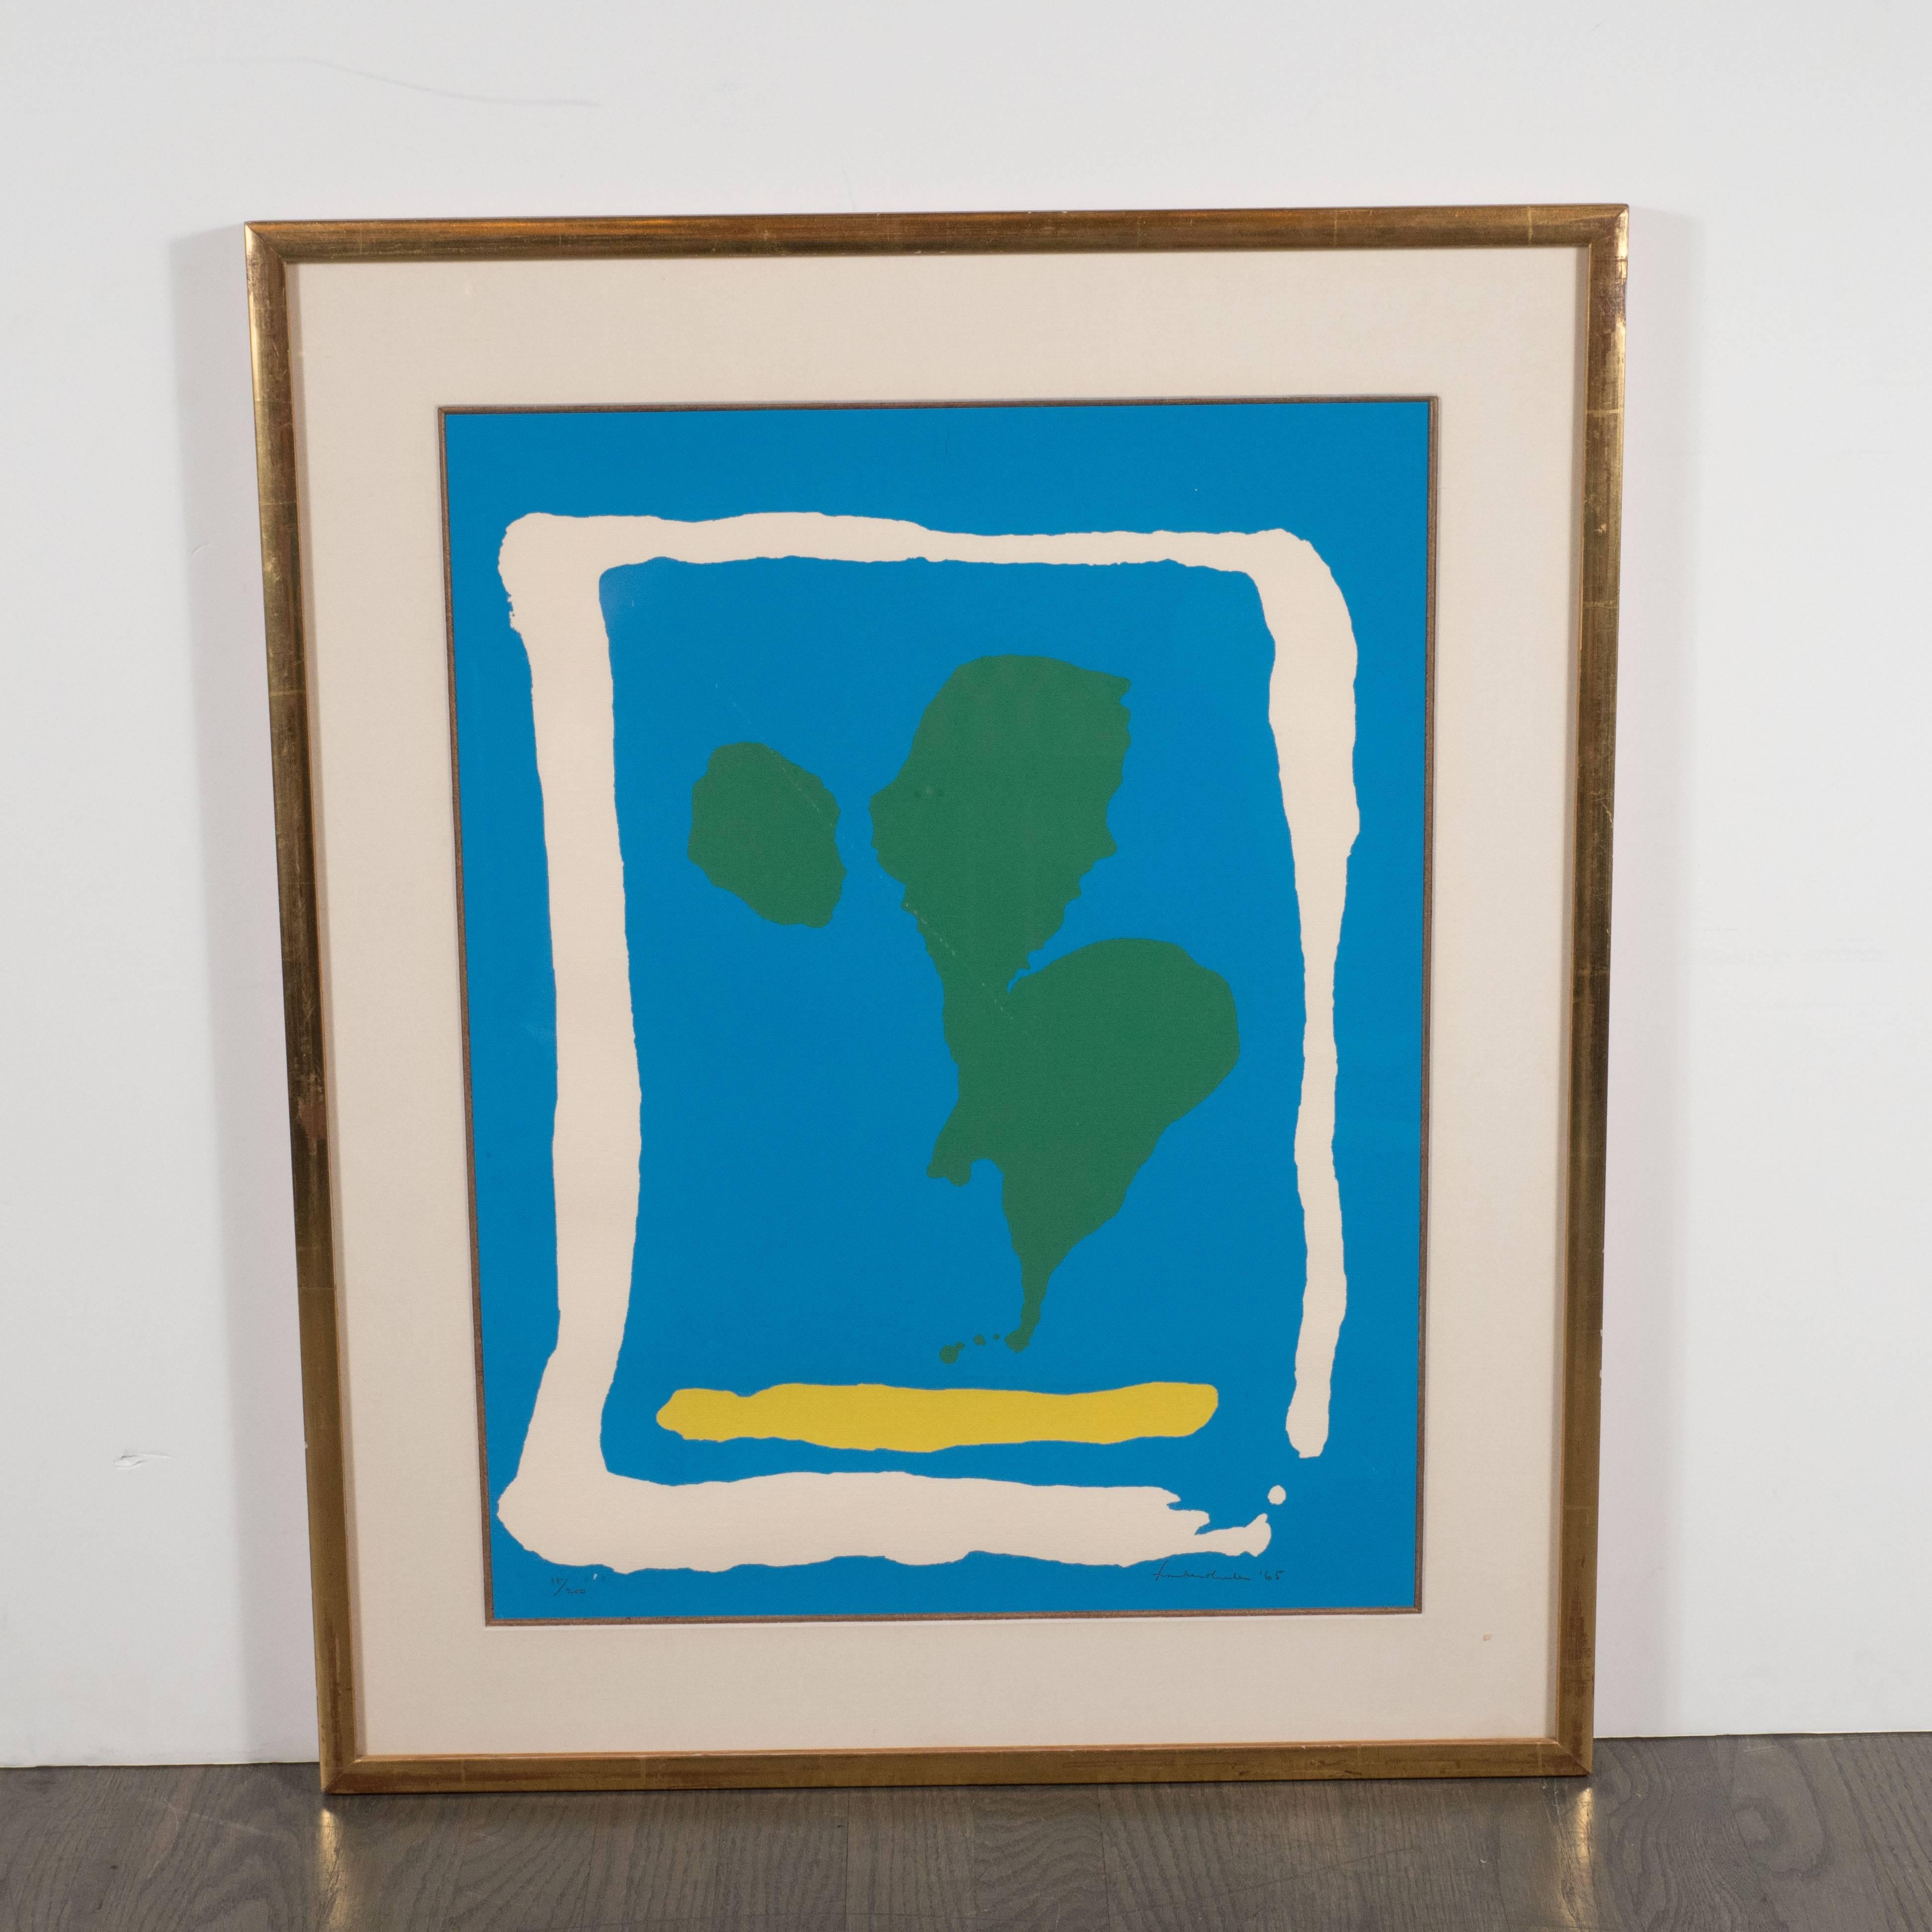 This compelling screenprint in colors was realized by the acclaimed Abstract Expressionist artist, Helen Frankenthaler- one of the canonized Masters of Modern Art, circa 1965. This piece offers the well balanced composition and exuberant palate that